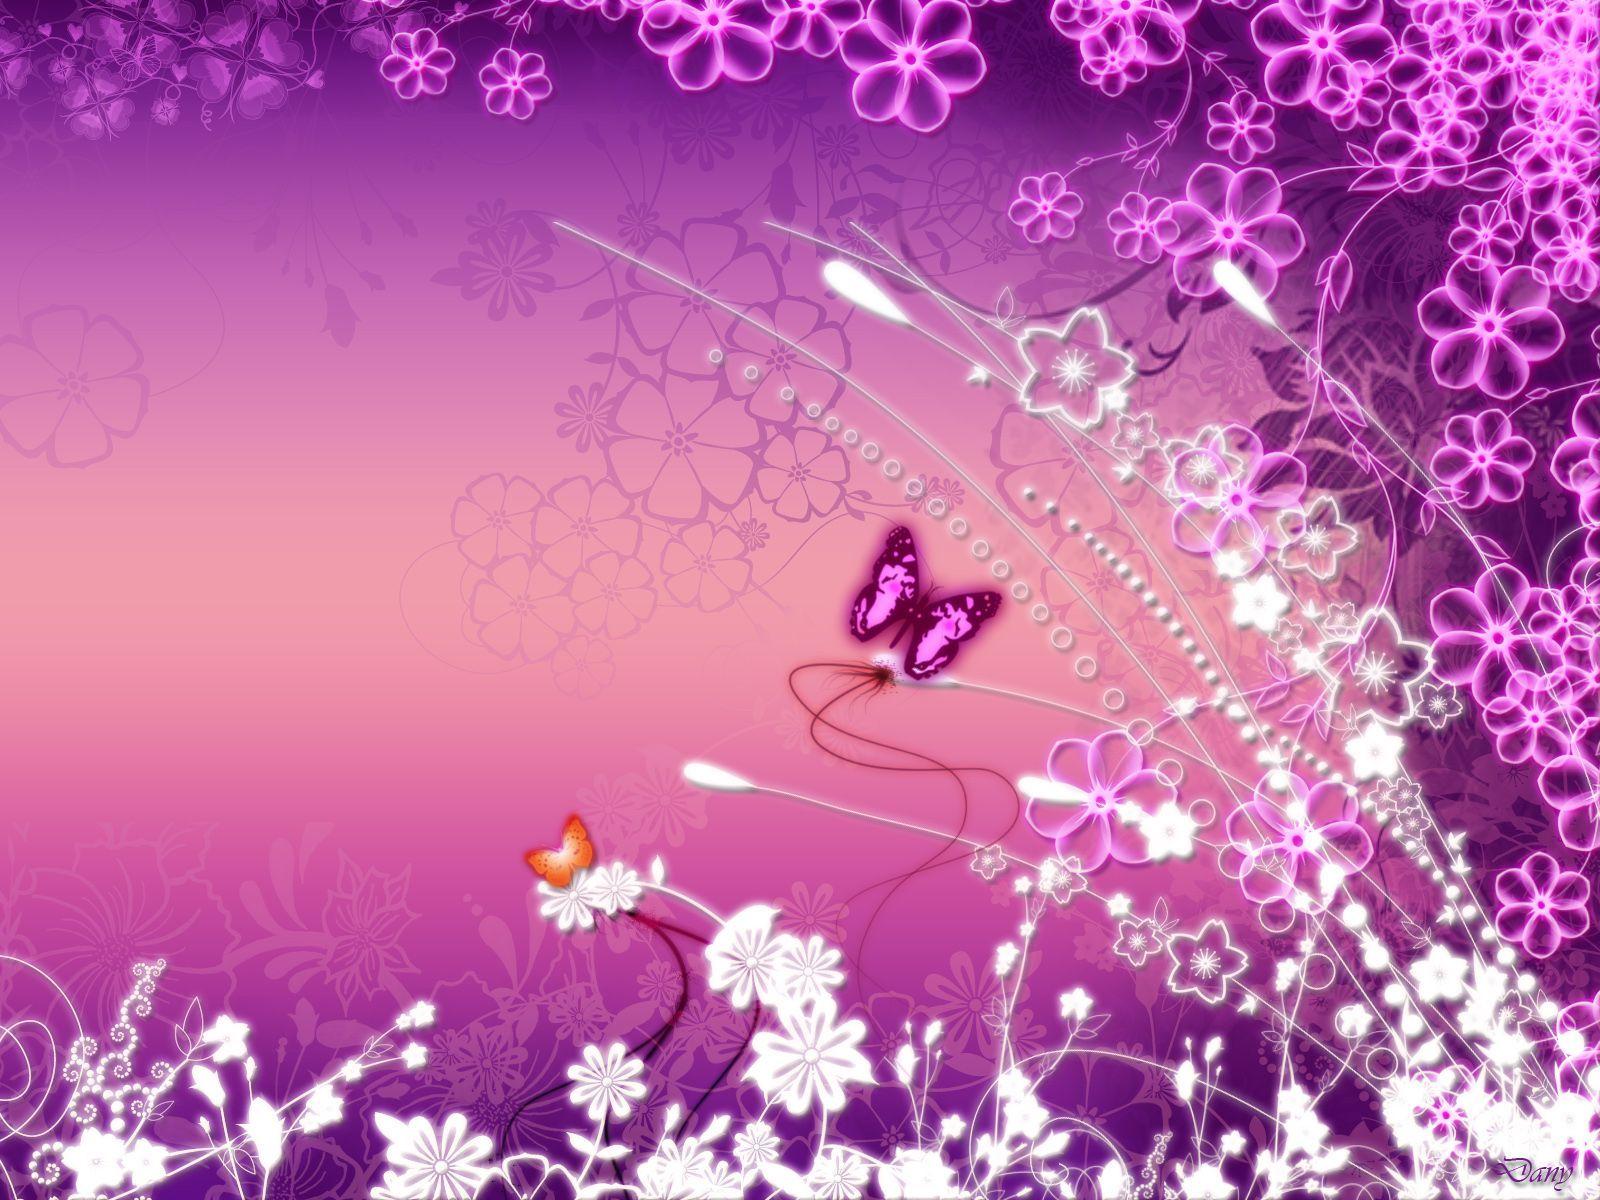 Pink Butterfly Wallpaper 1080p. Decorate. Butterfly